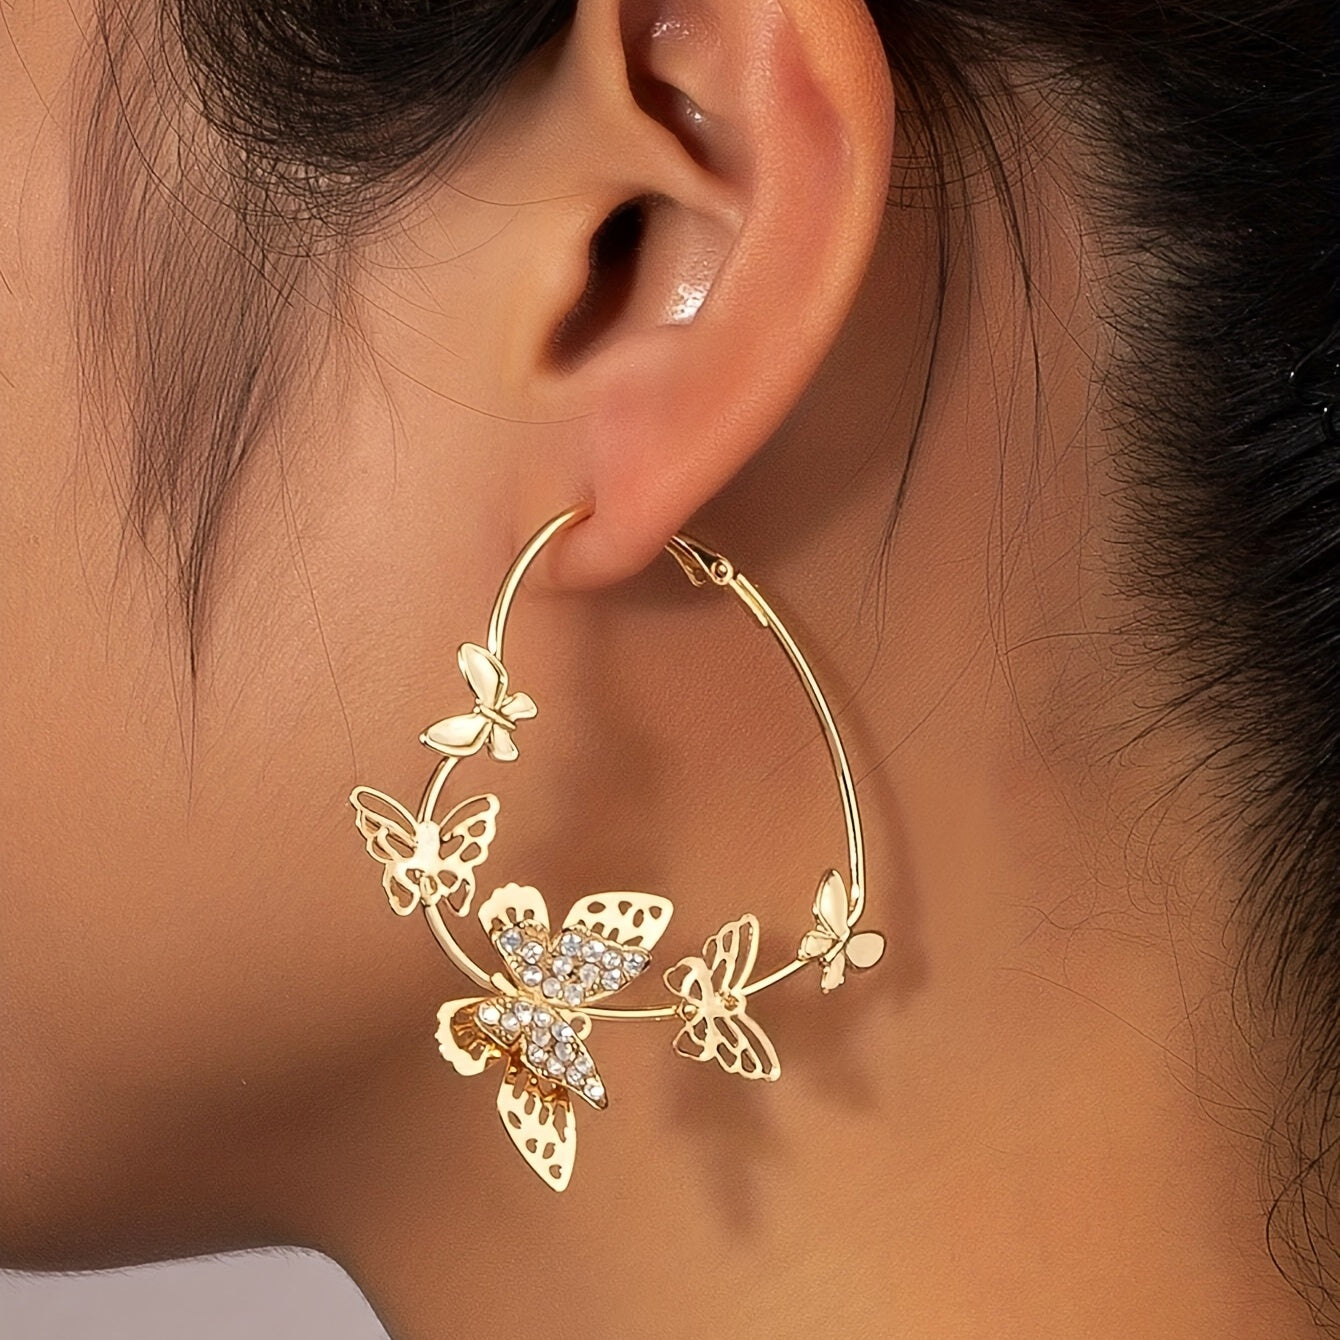 Heart Shape With Exquisite Golden Butterflies Decor Shiny Rhinestone Inlaid Hoop Earrings Cute Vocation Style Trendy Female Gift